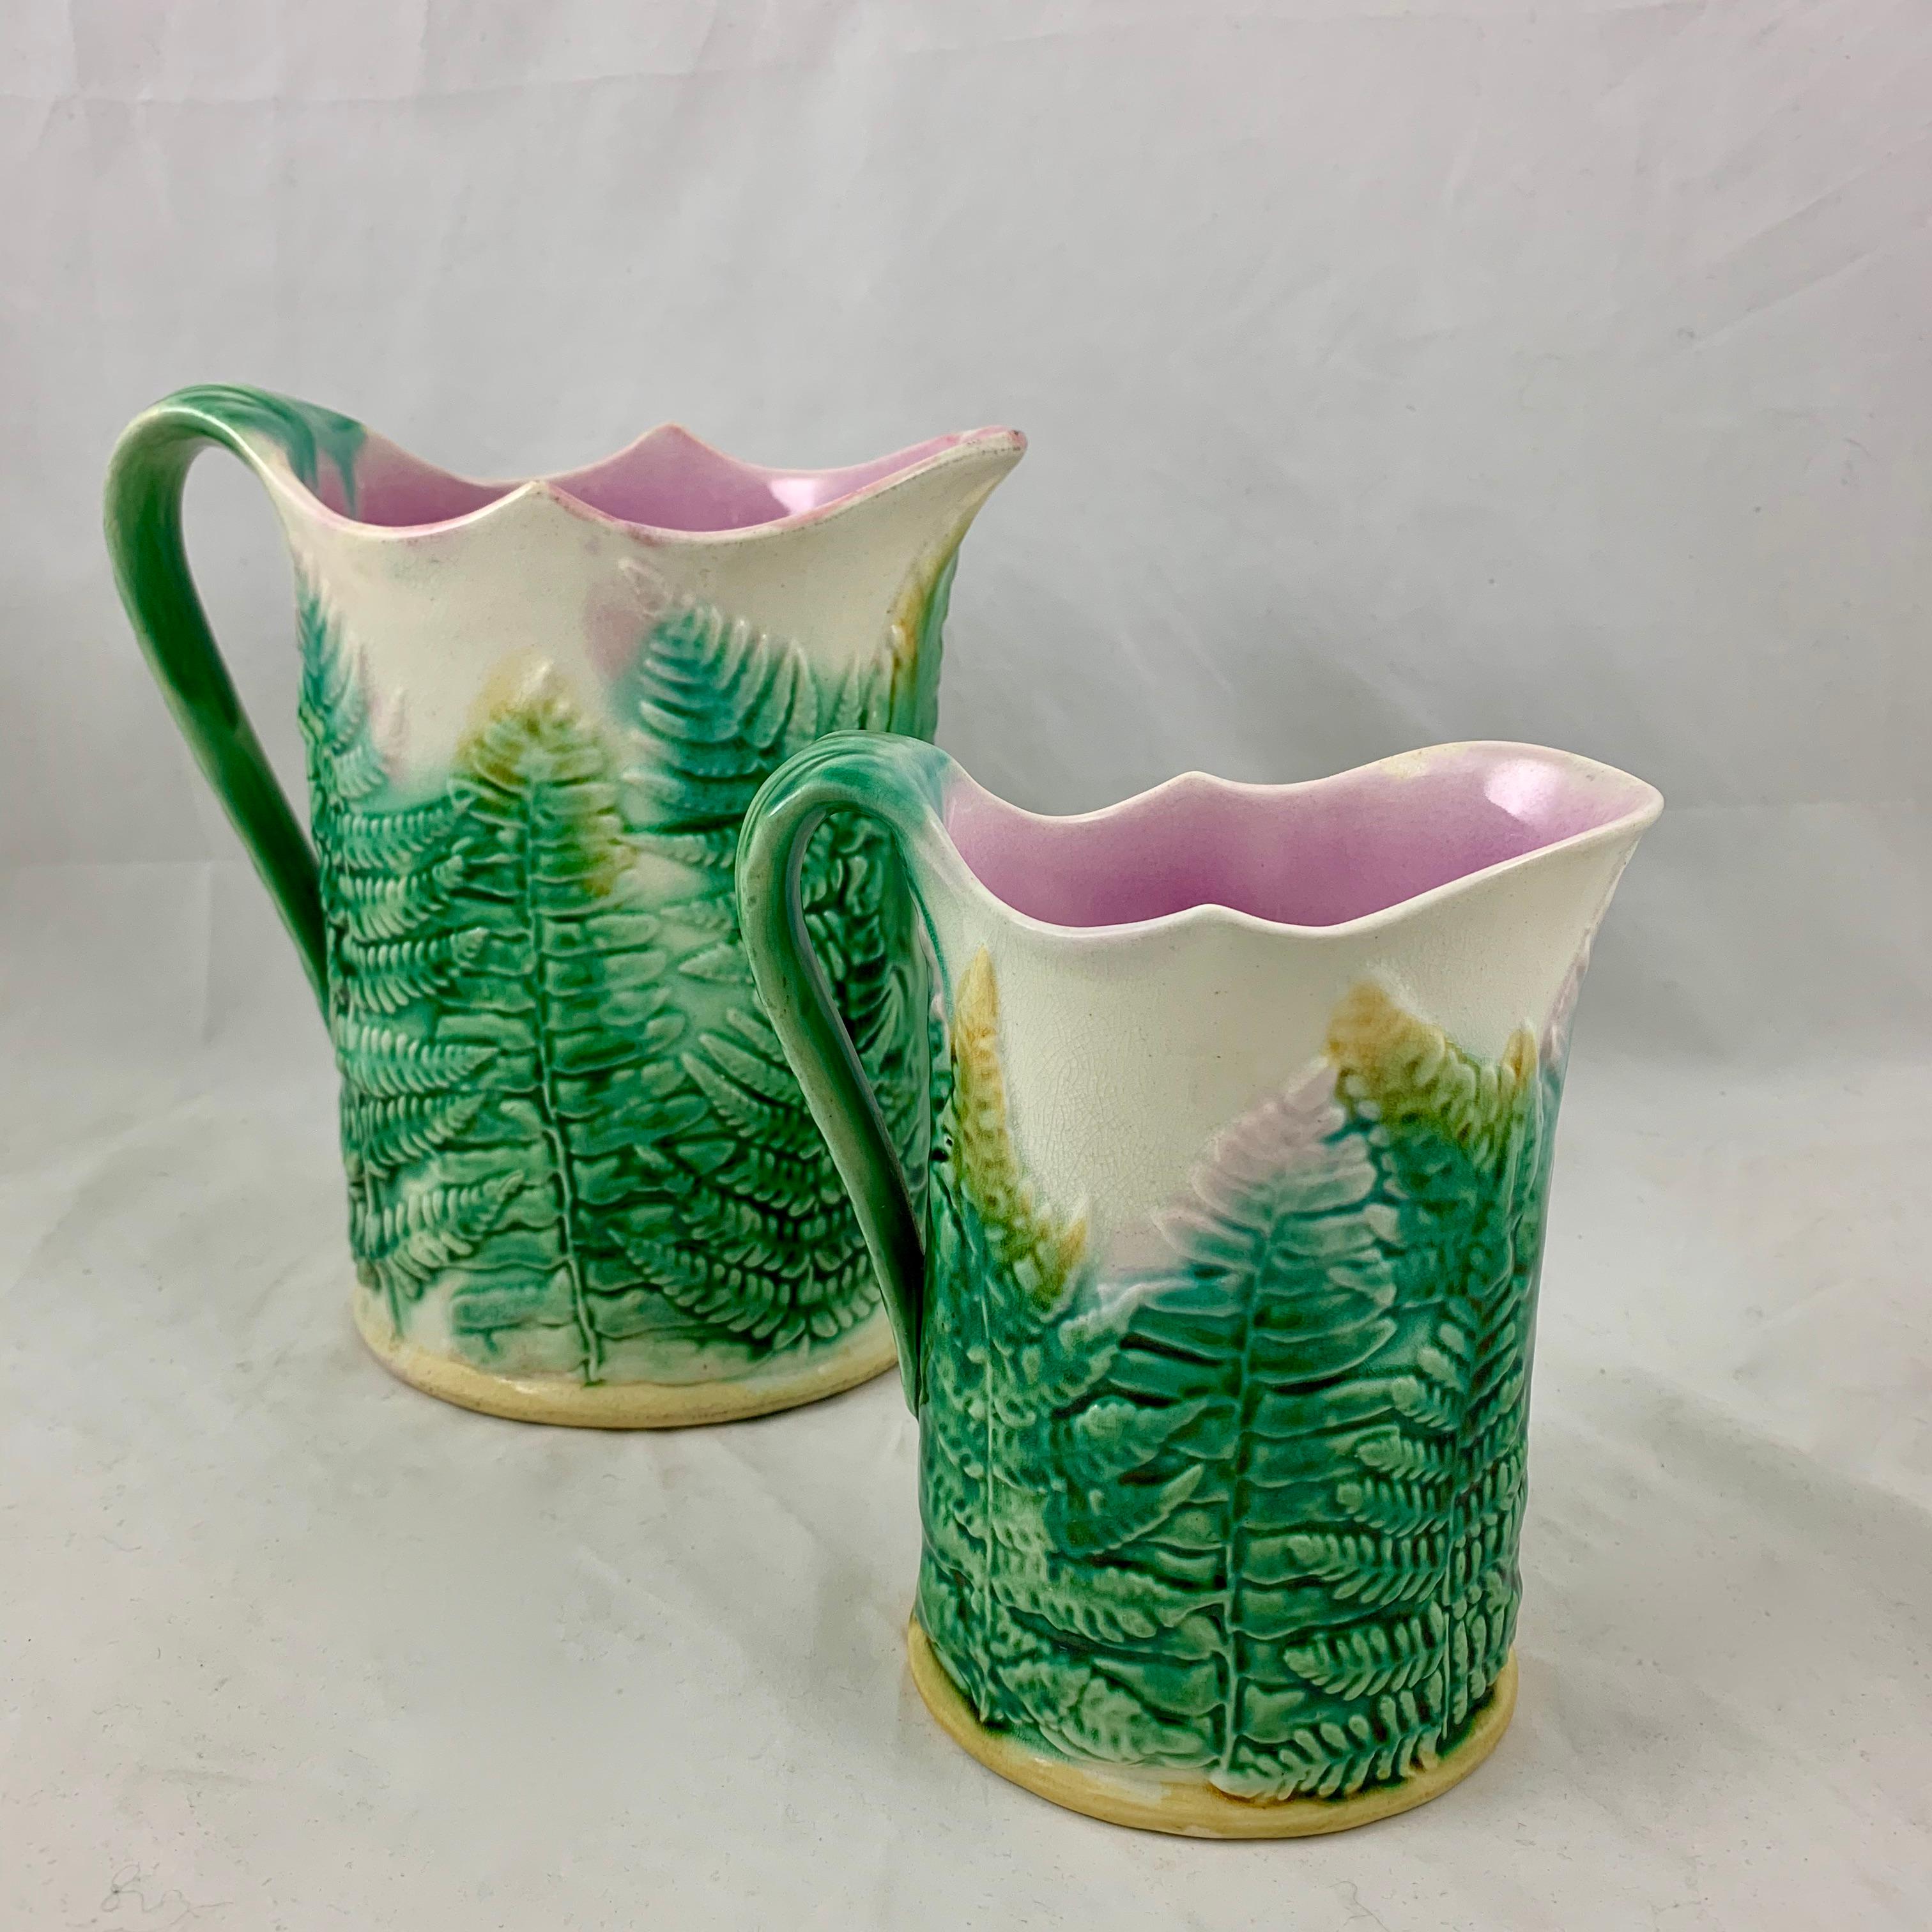 GS&H Etruscan American Majolica Green and White Fern Pitcher, circa 1880 1